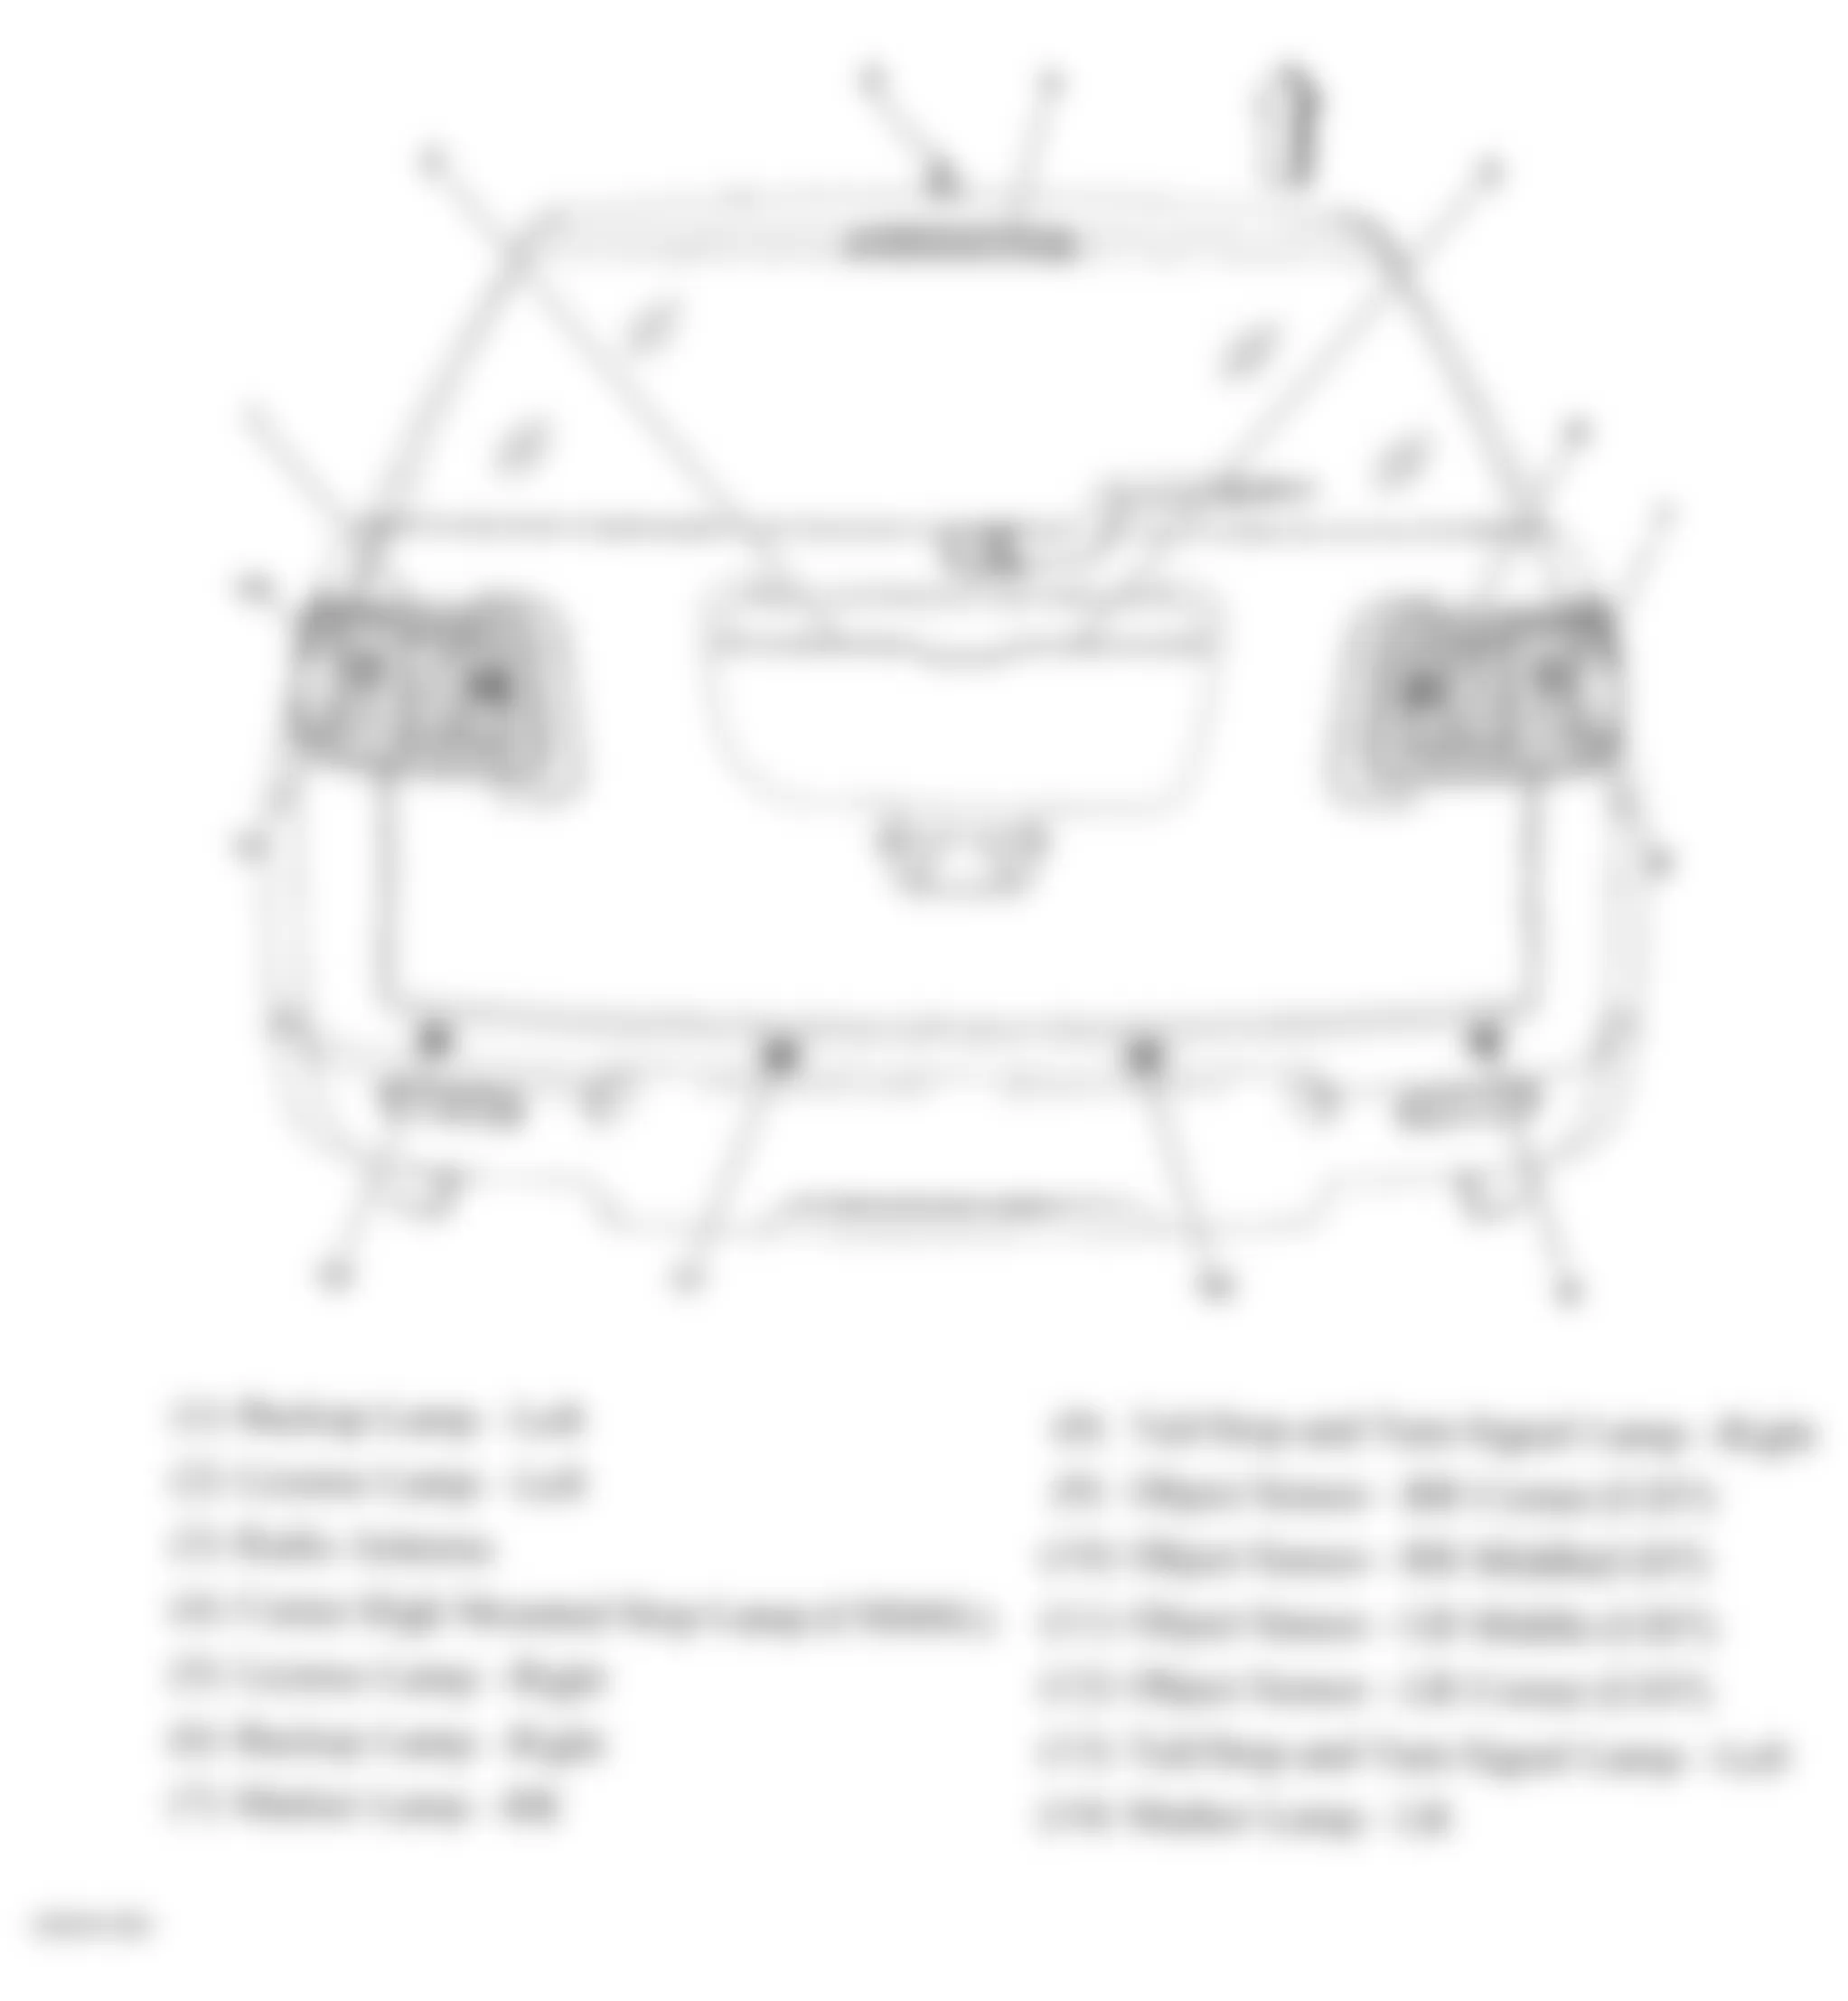 Buick Enclave CXL 2010 - Component Locations -  Rear Of Vehicle (Acadia & Outlook)